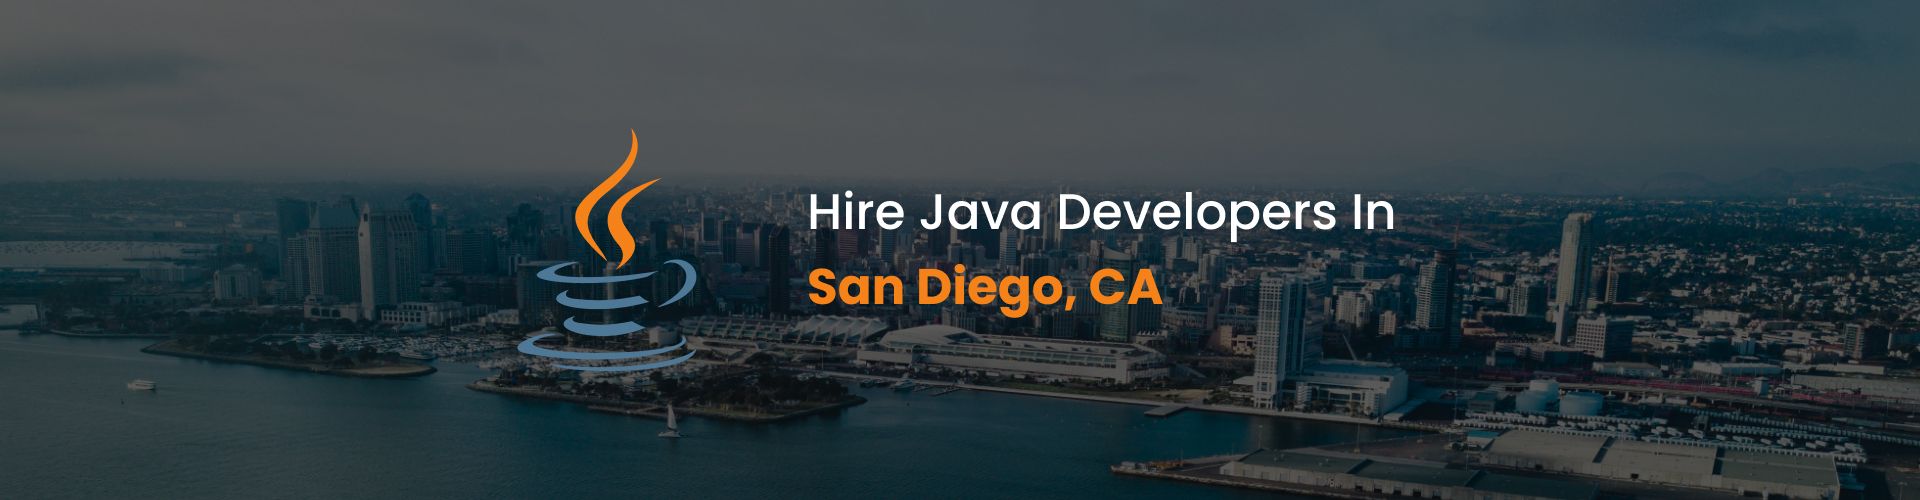 hire java developers in san diego